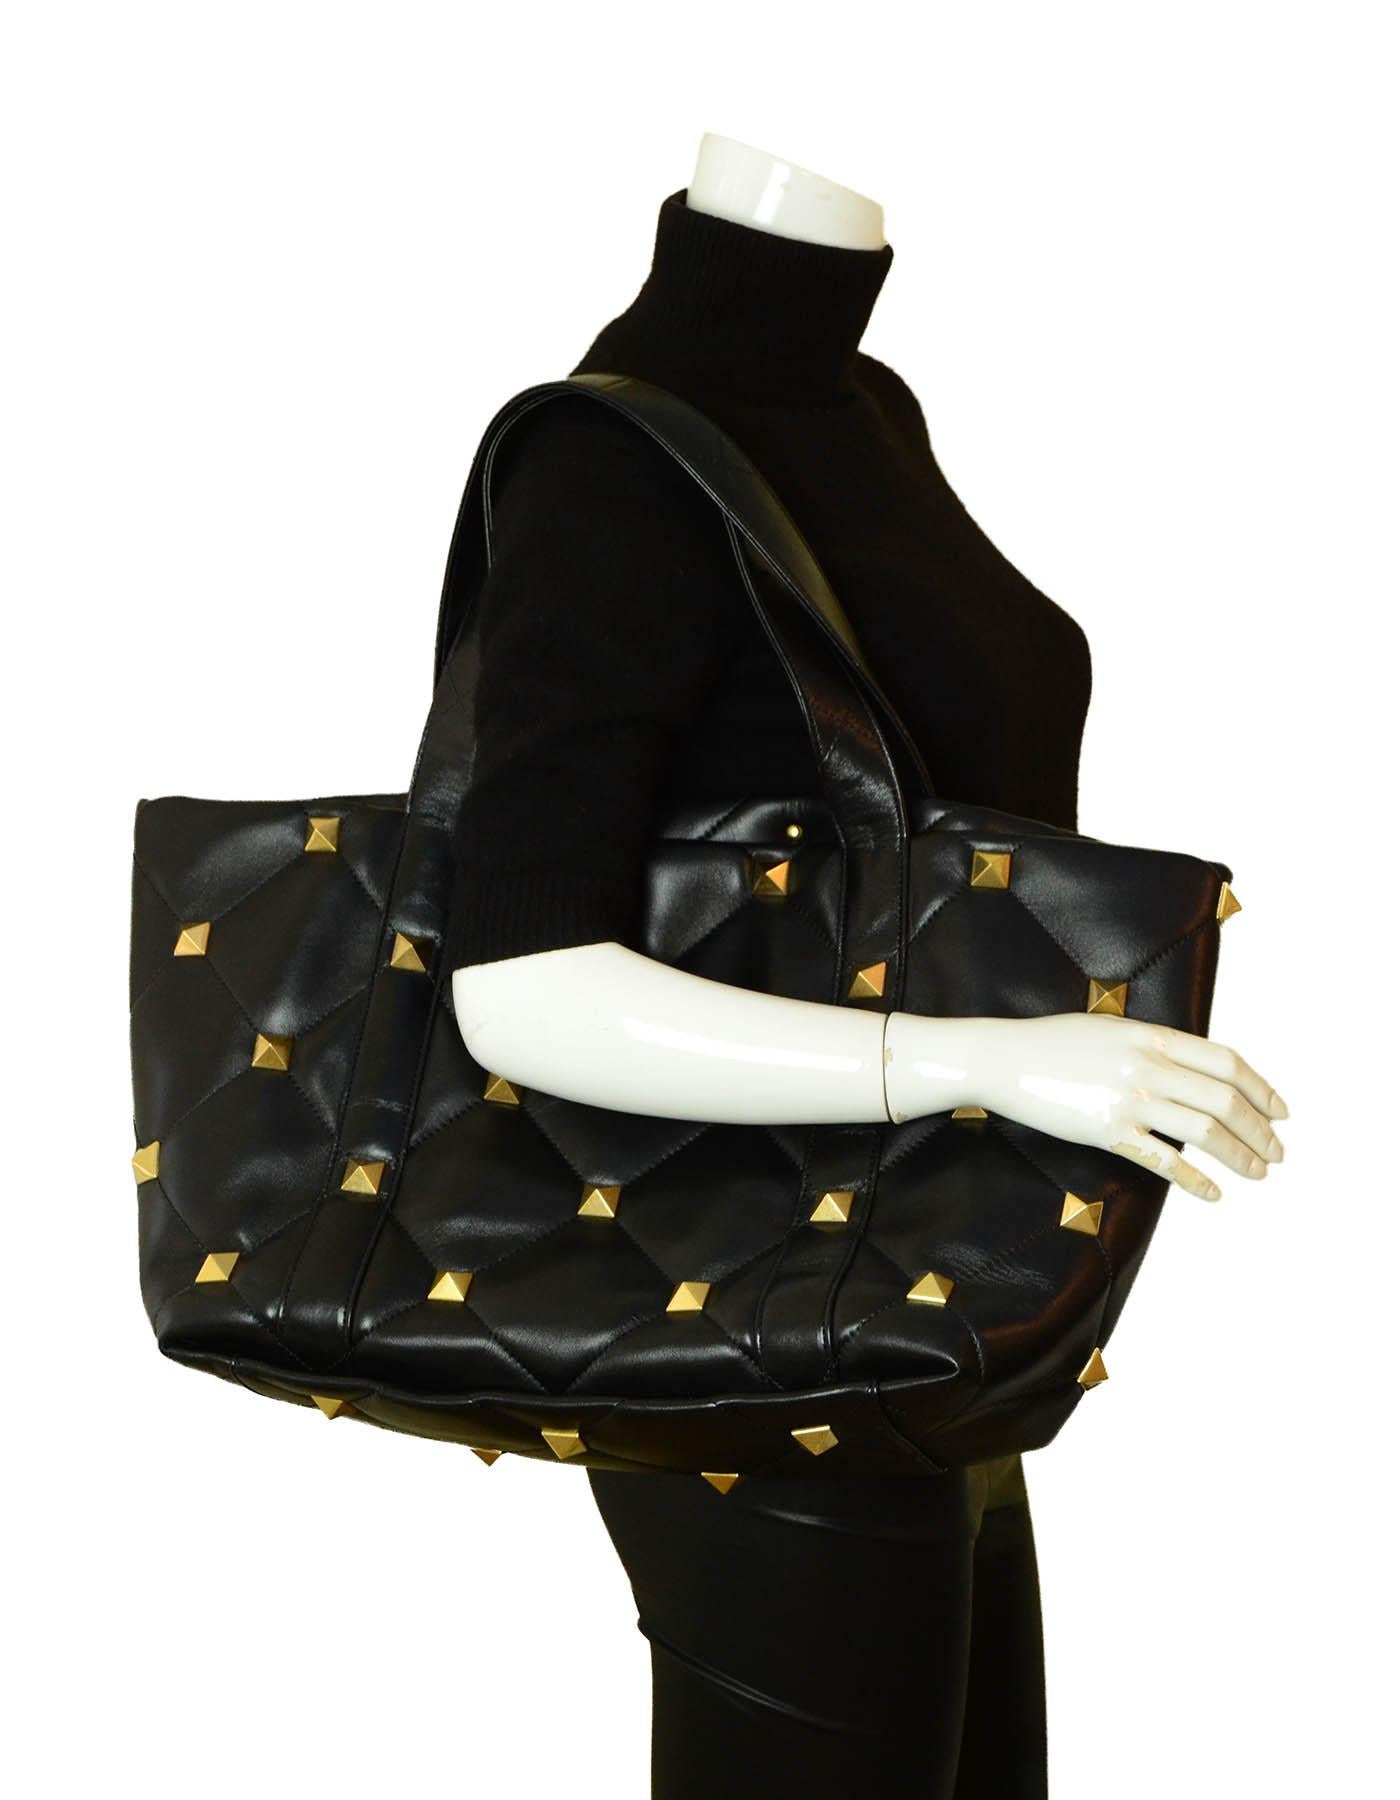 Valentino Garavani 2020 Roman Stud Quilted Leather Tote Bag

Made In: Italy
Year of Production: 2020
Color: Black
Hardware: Goldtone
Materials: Leather and metal
Lining: Smooth black leather
Closure/Opening: Open top
Exterior Pockets: N/A
Interior